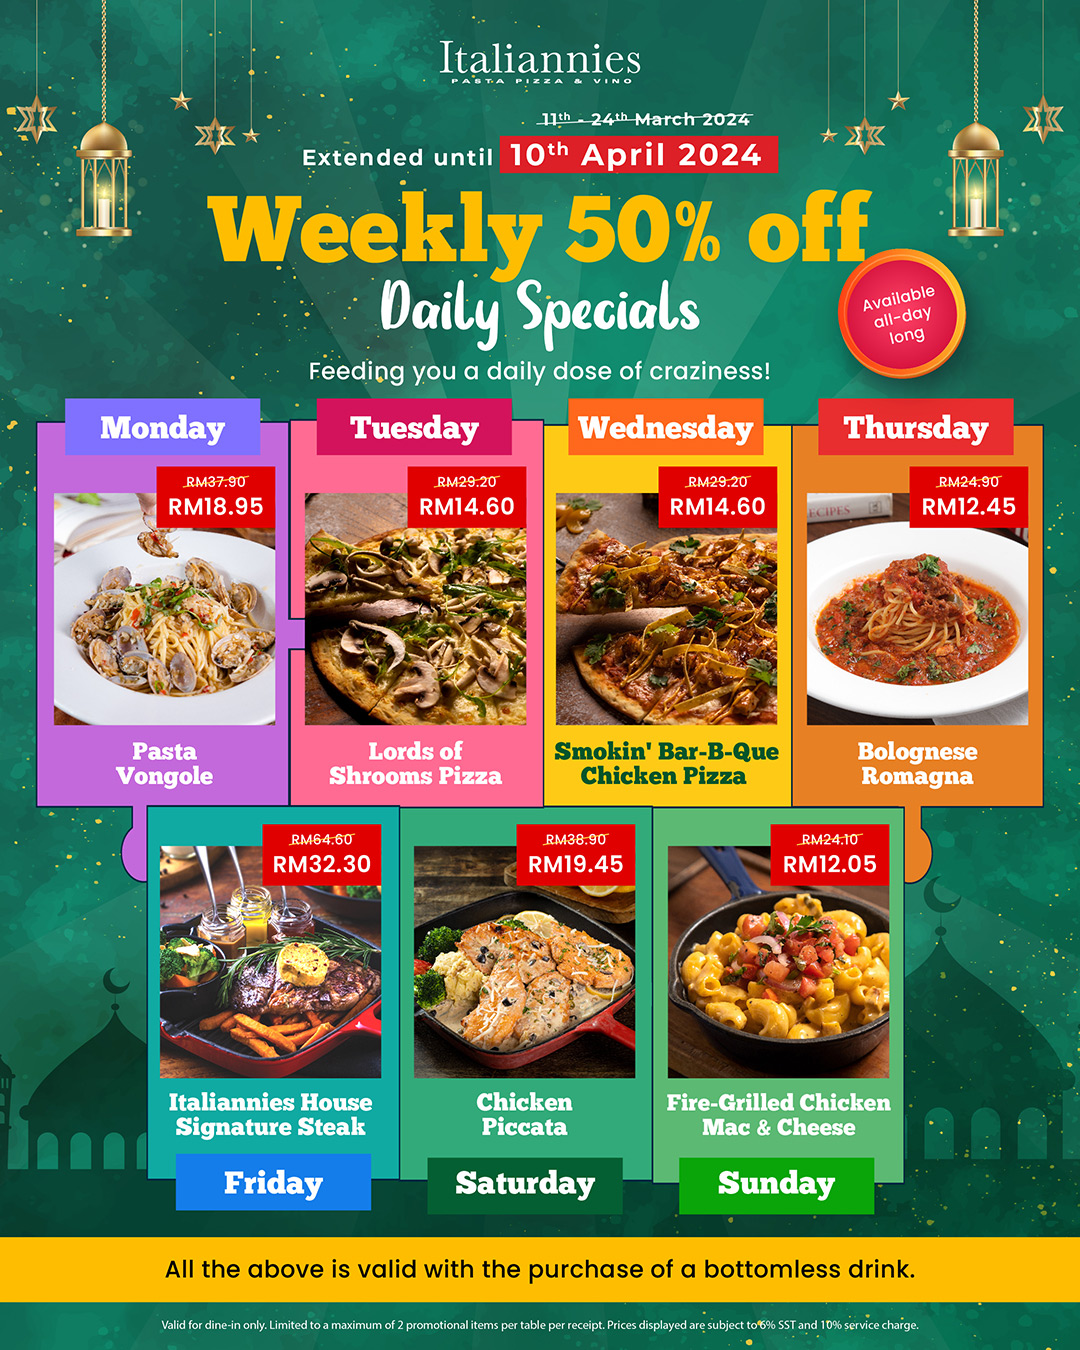 Weekly 50% Off